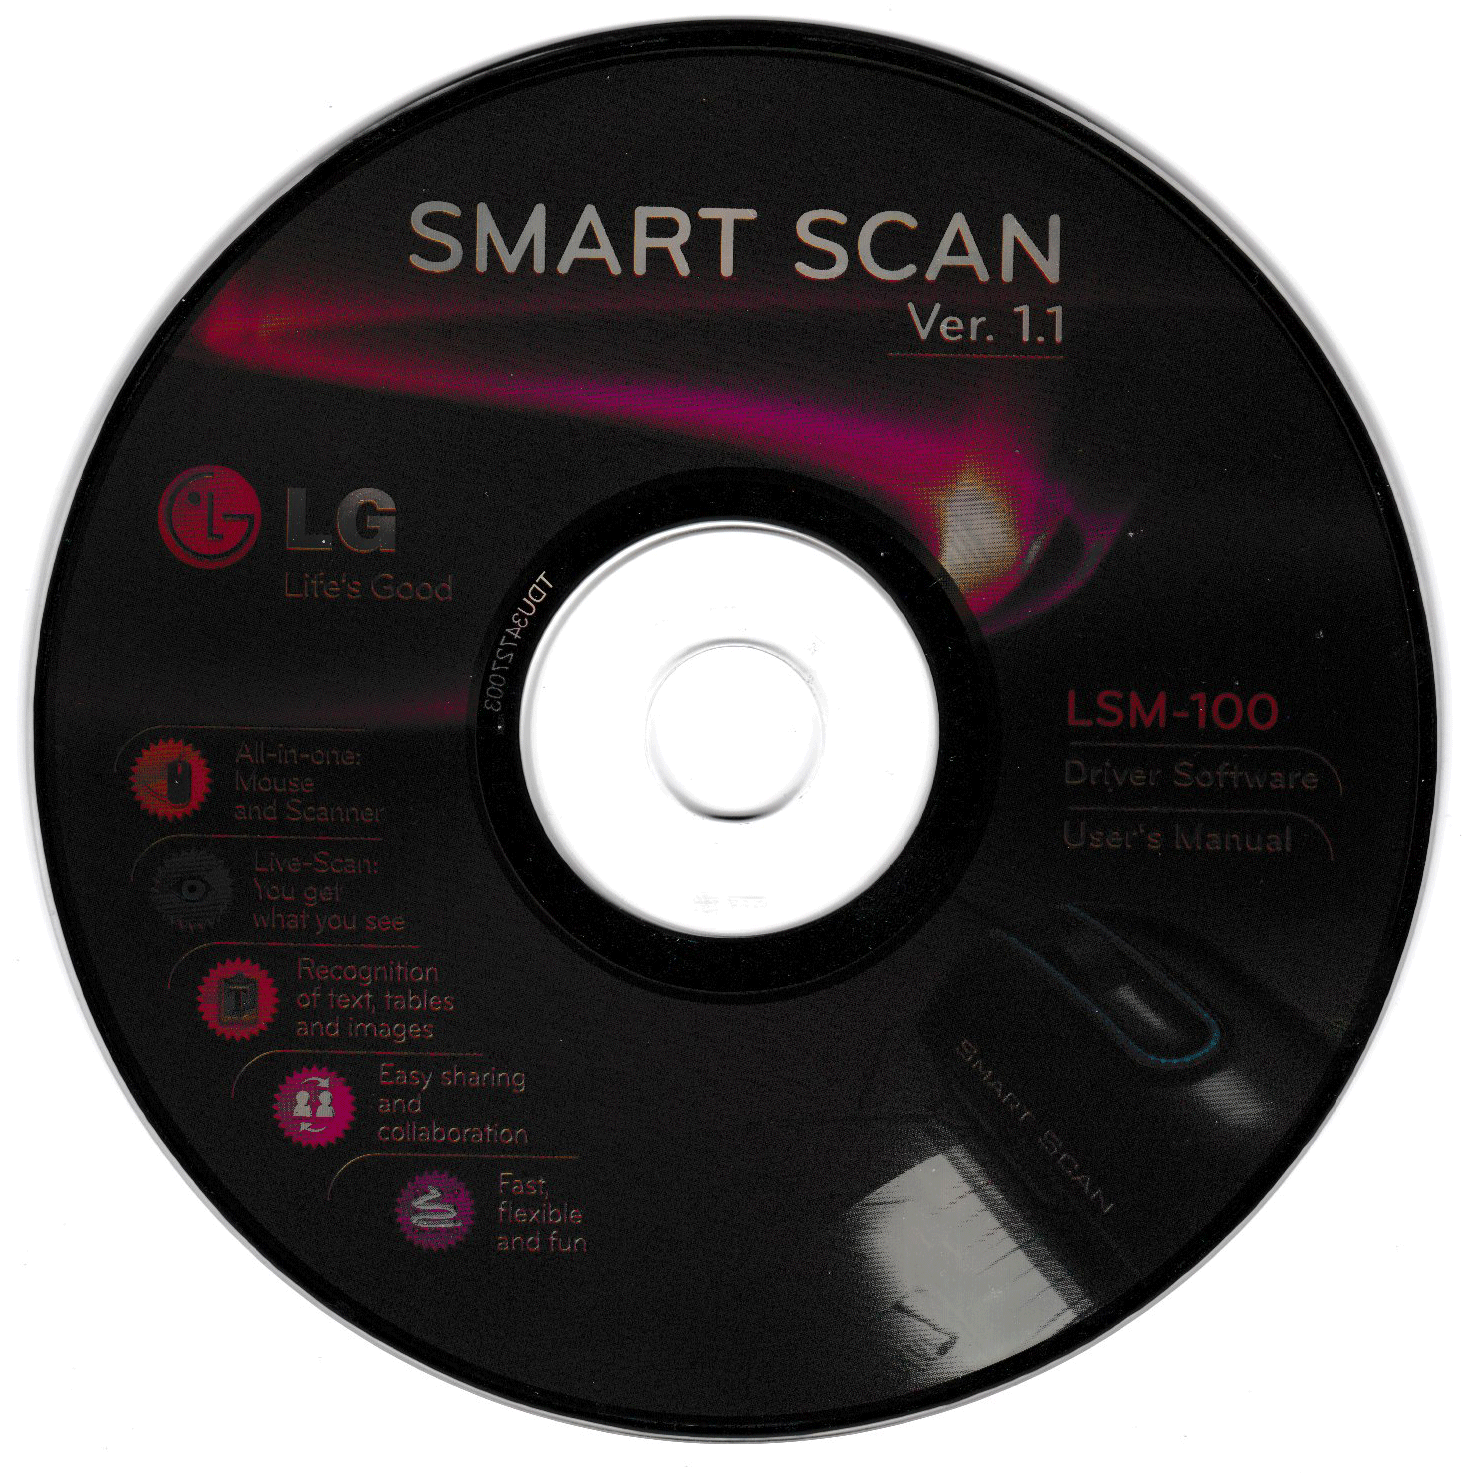 Mouse Scanner - LSM-100 - Smart Scan Ver. (Driver & User Manual) : LG Free Download, Borrow, and Streaming : Internet Archive